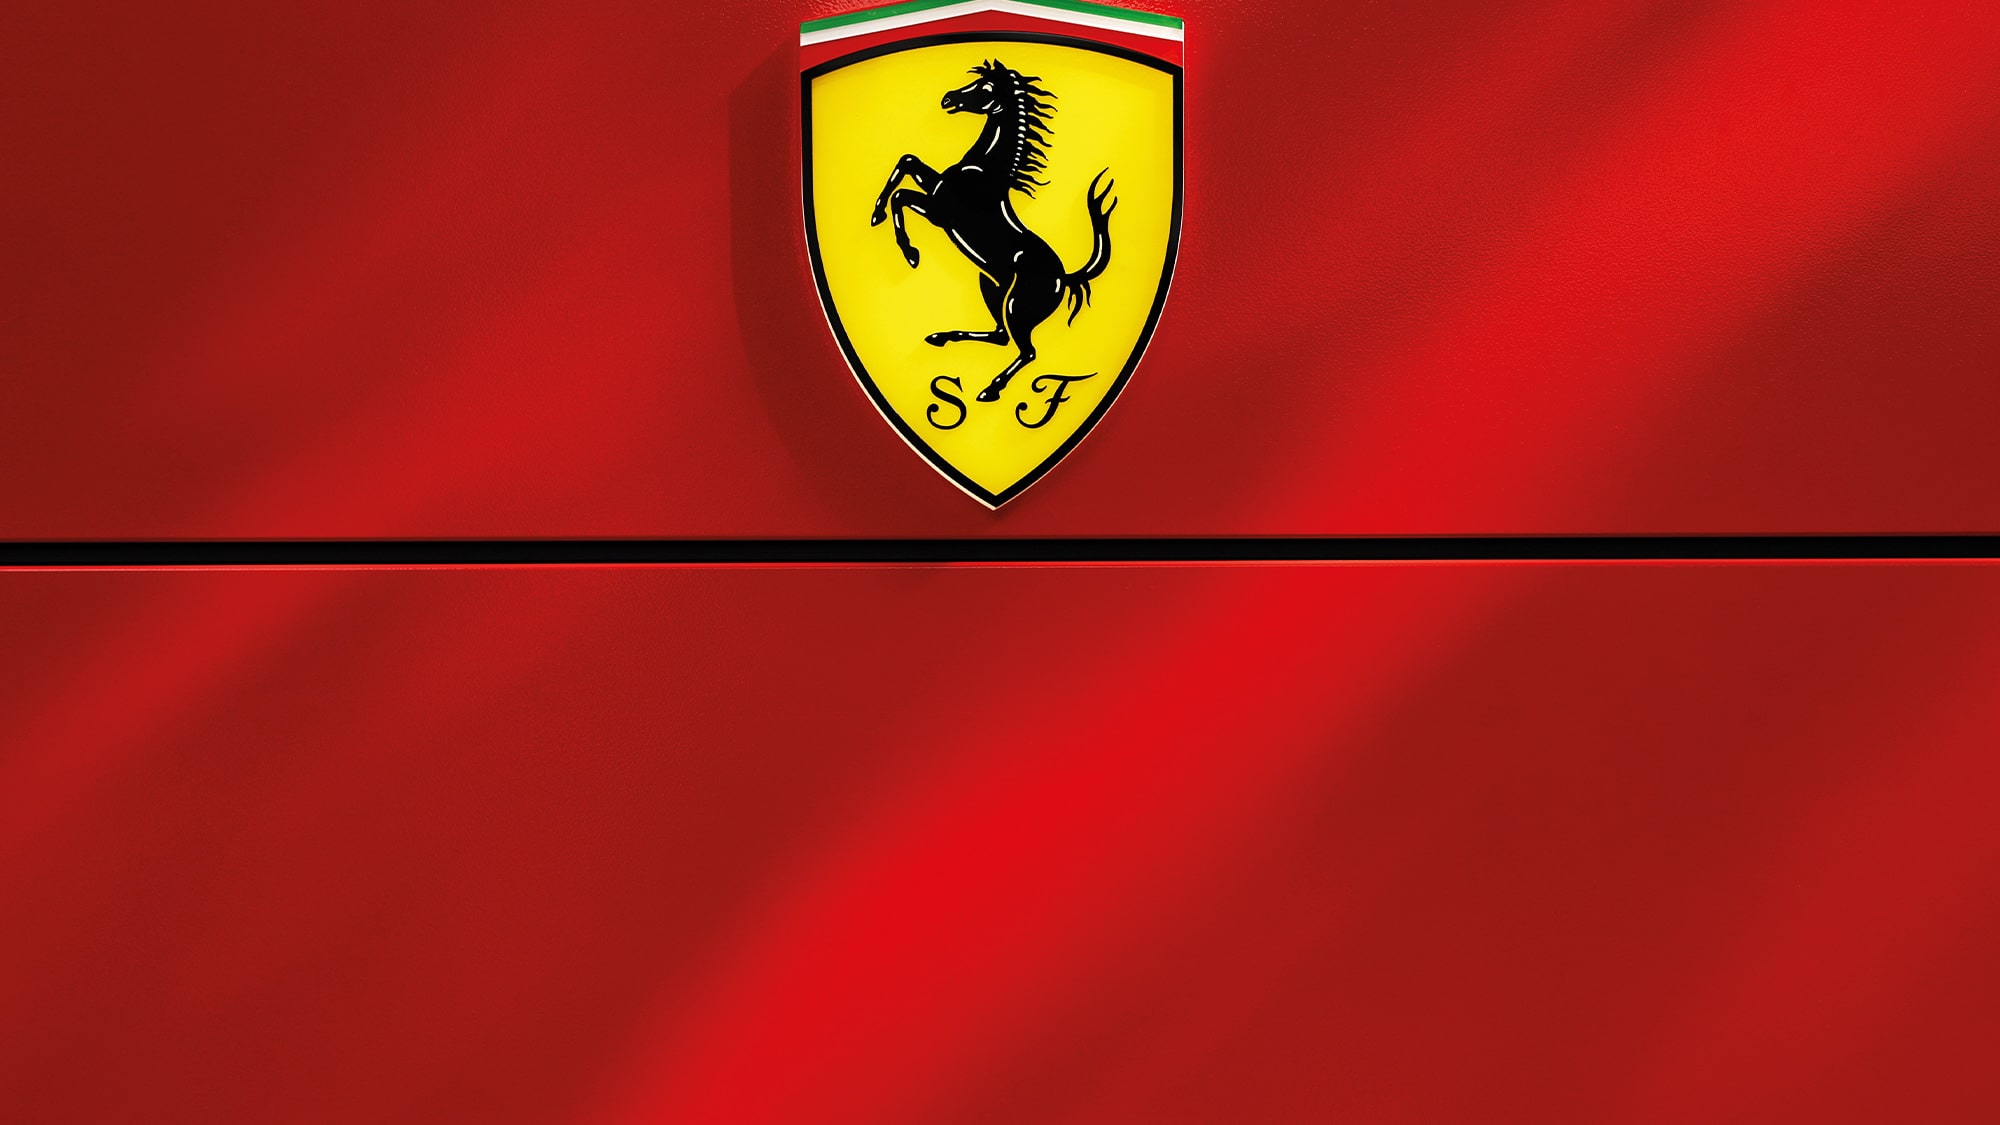 Back in the saddle for 2022: How Ferrari stole a march on F1 rivals ...